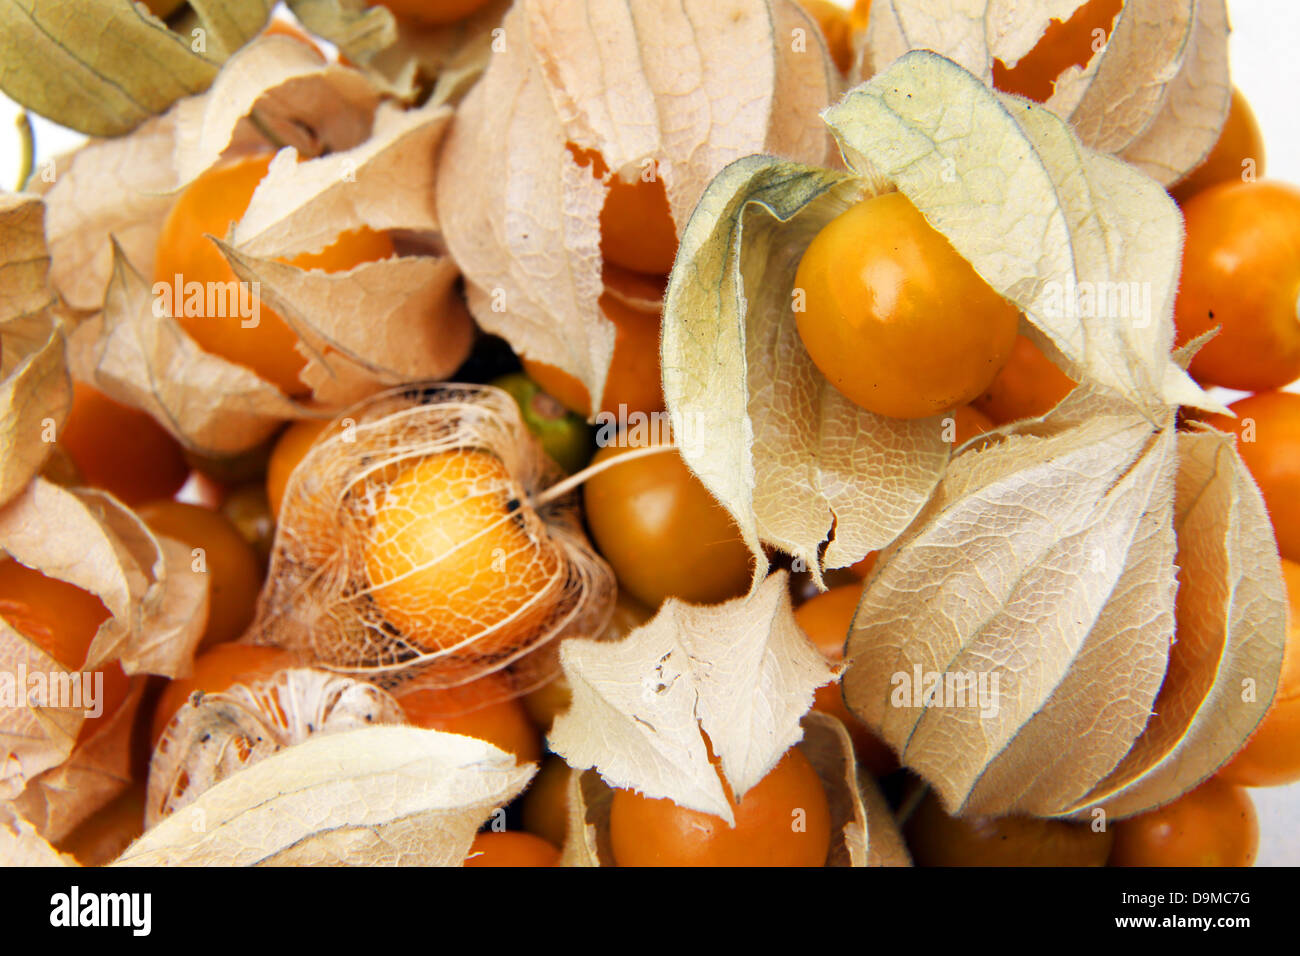 Ripe Cape Gooseberries (Physalis Peruviana) In Calyx From The Nightshade Family Stock Photo